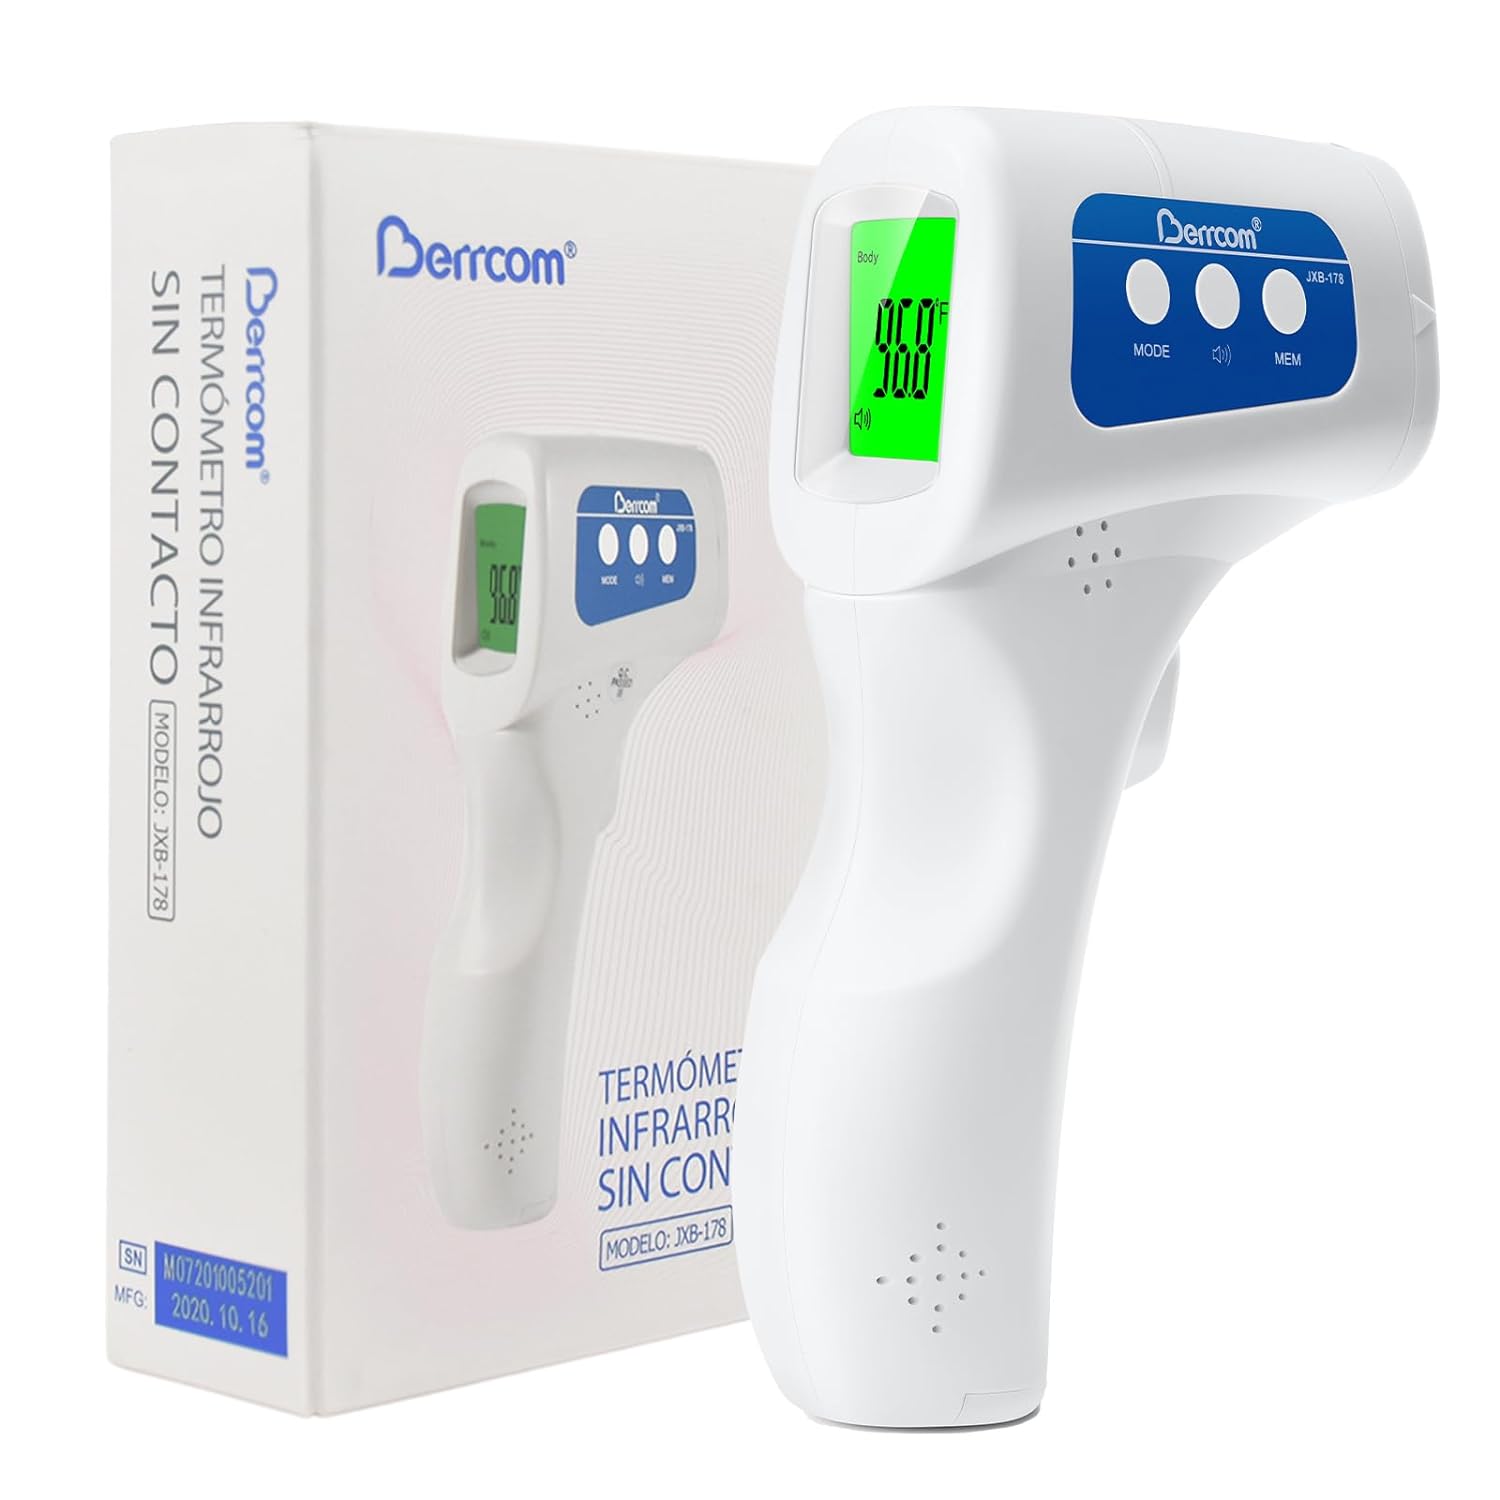 Berrcom Non Contact Forehead Thermometer Digital No-Touch Infrared Thermometer 3 in 1 for Adults and Kids Fever Check Thermometer Temperature Gun for Baby